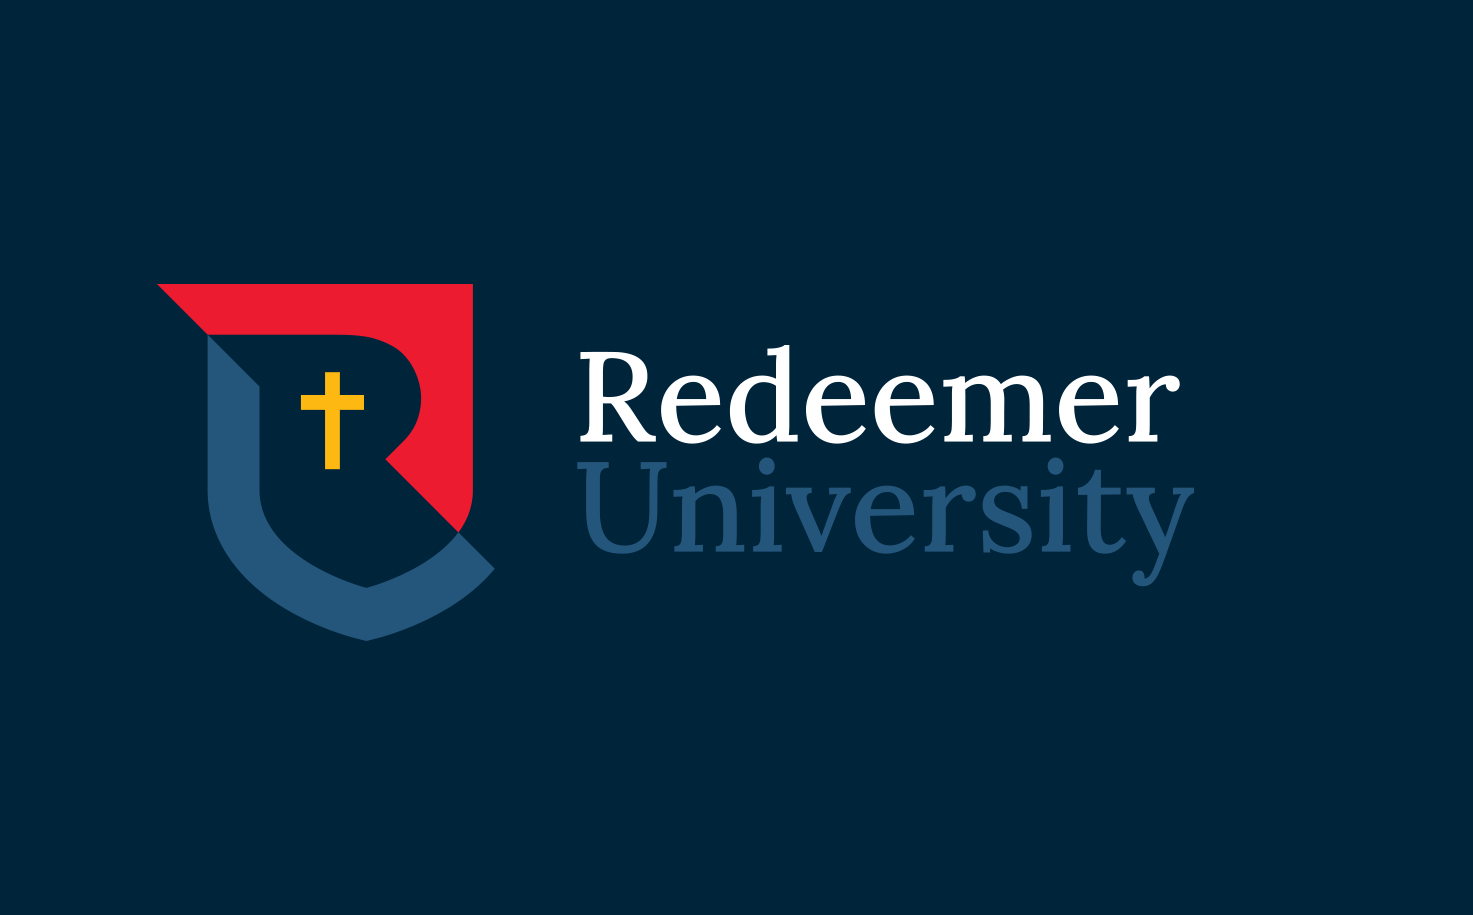 Redeemer University partners with Hamilton 2026 over proposed multi-sport venue